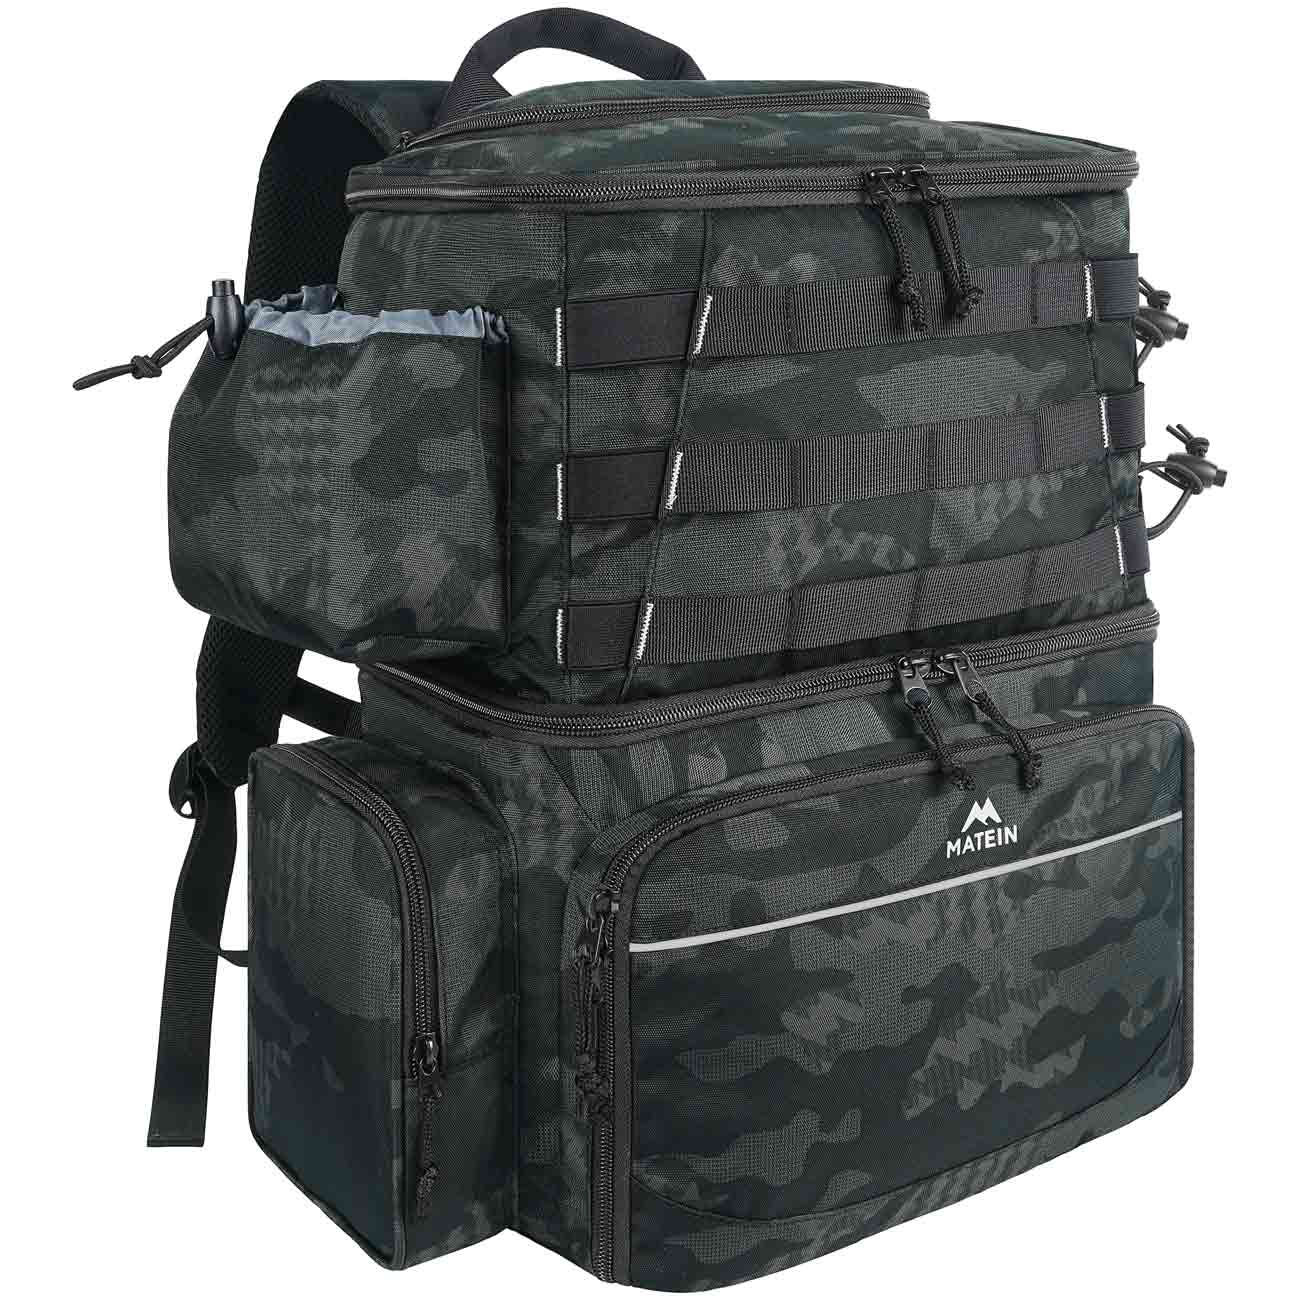 Large Fishing Backpack with Cooler for 3 Tackle Nepal